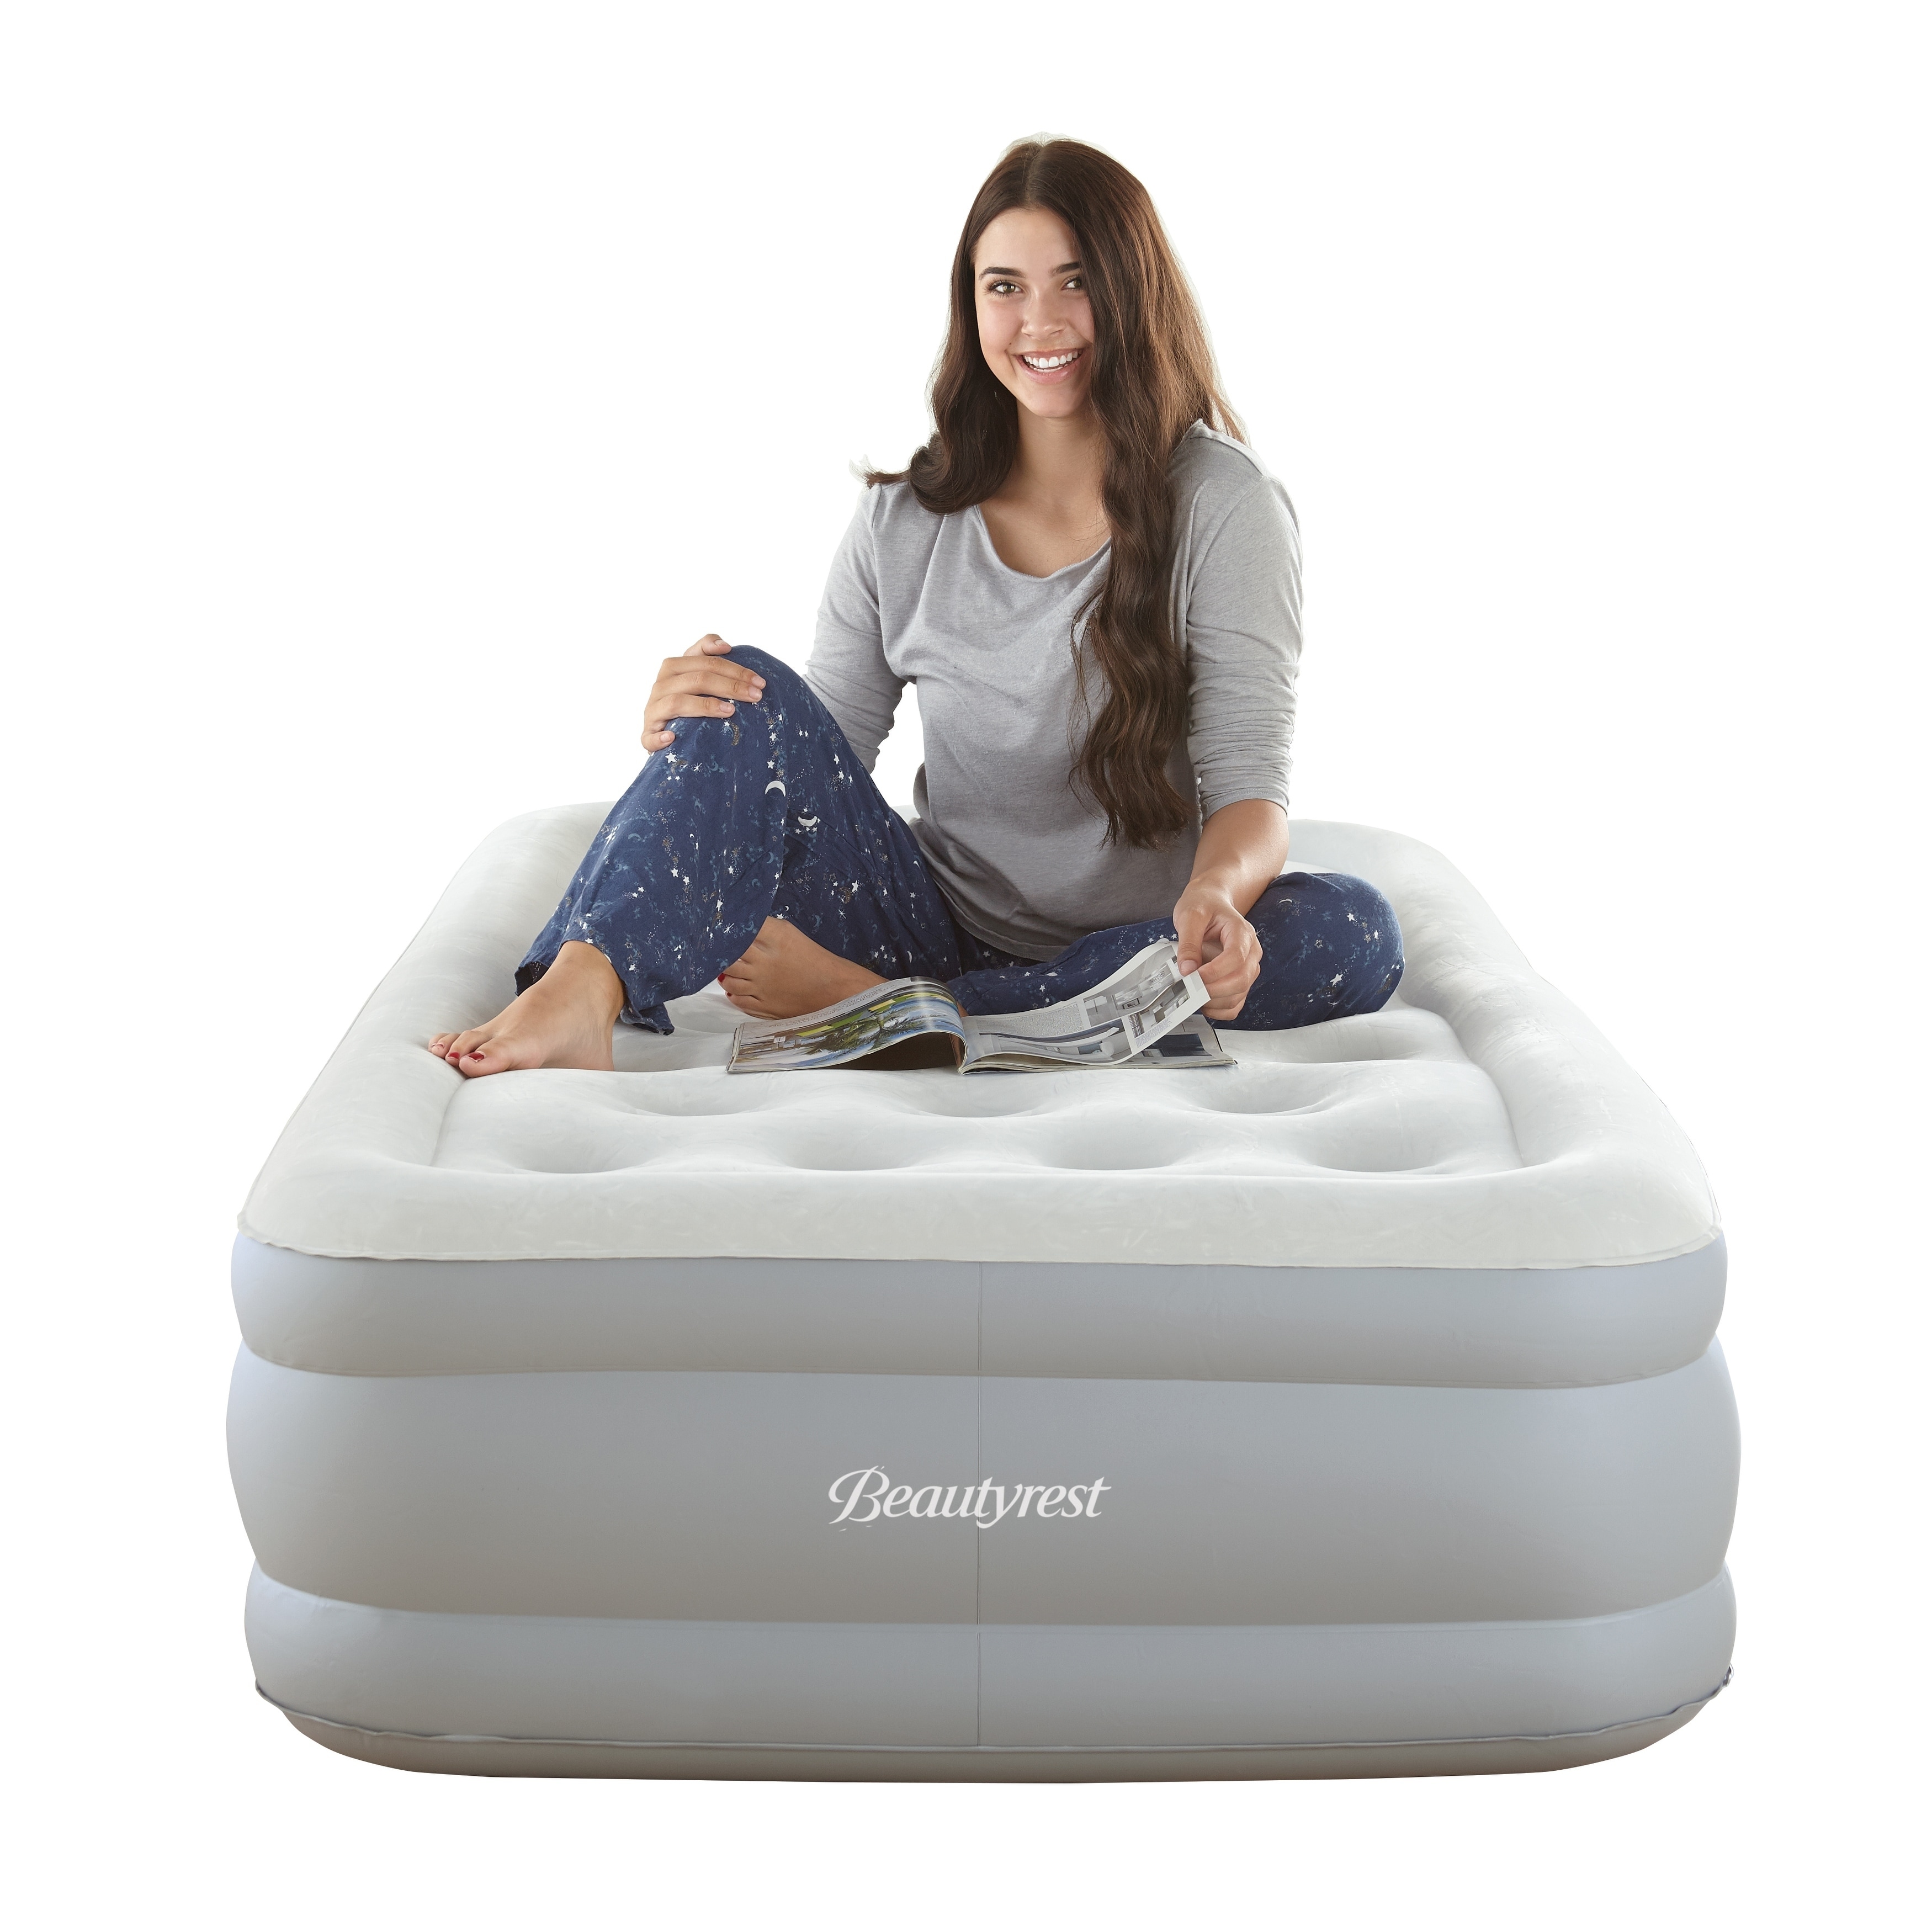 https://ak1.ostkcdn.com/images/products/27221144/Beautyrest-Sky-Rise-14-inch-Twin-Size-Adjustable-Comfort-Coil-Top-Raised-Air-Bed-Mattress-with-Edge-Support-and-Express-Pump-dfcb2745-905a-447d-8f55-23f7de032c38.jpg